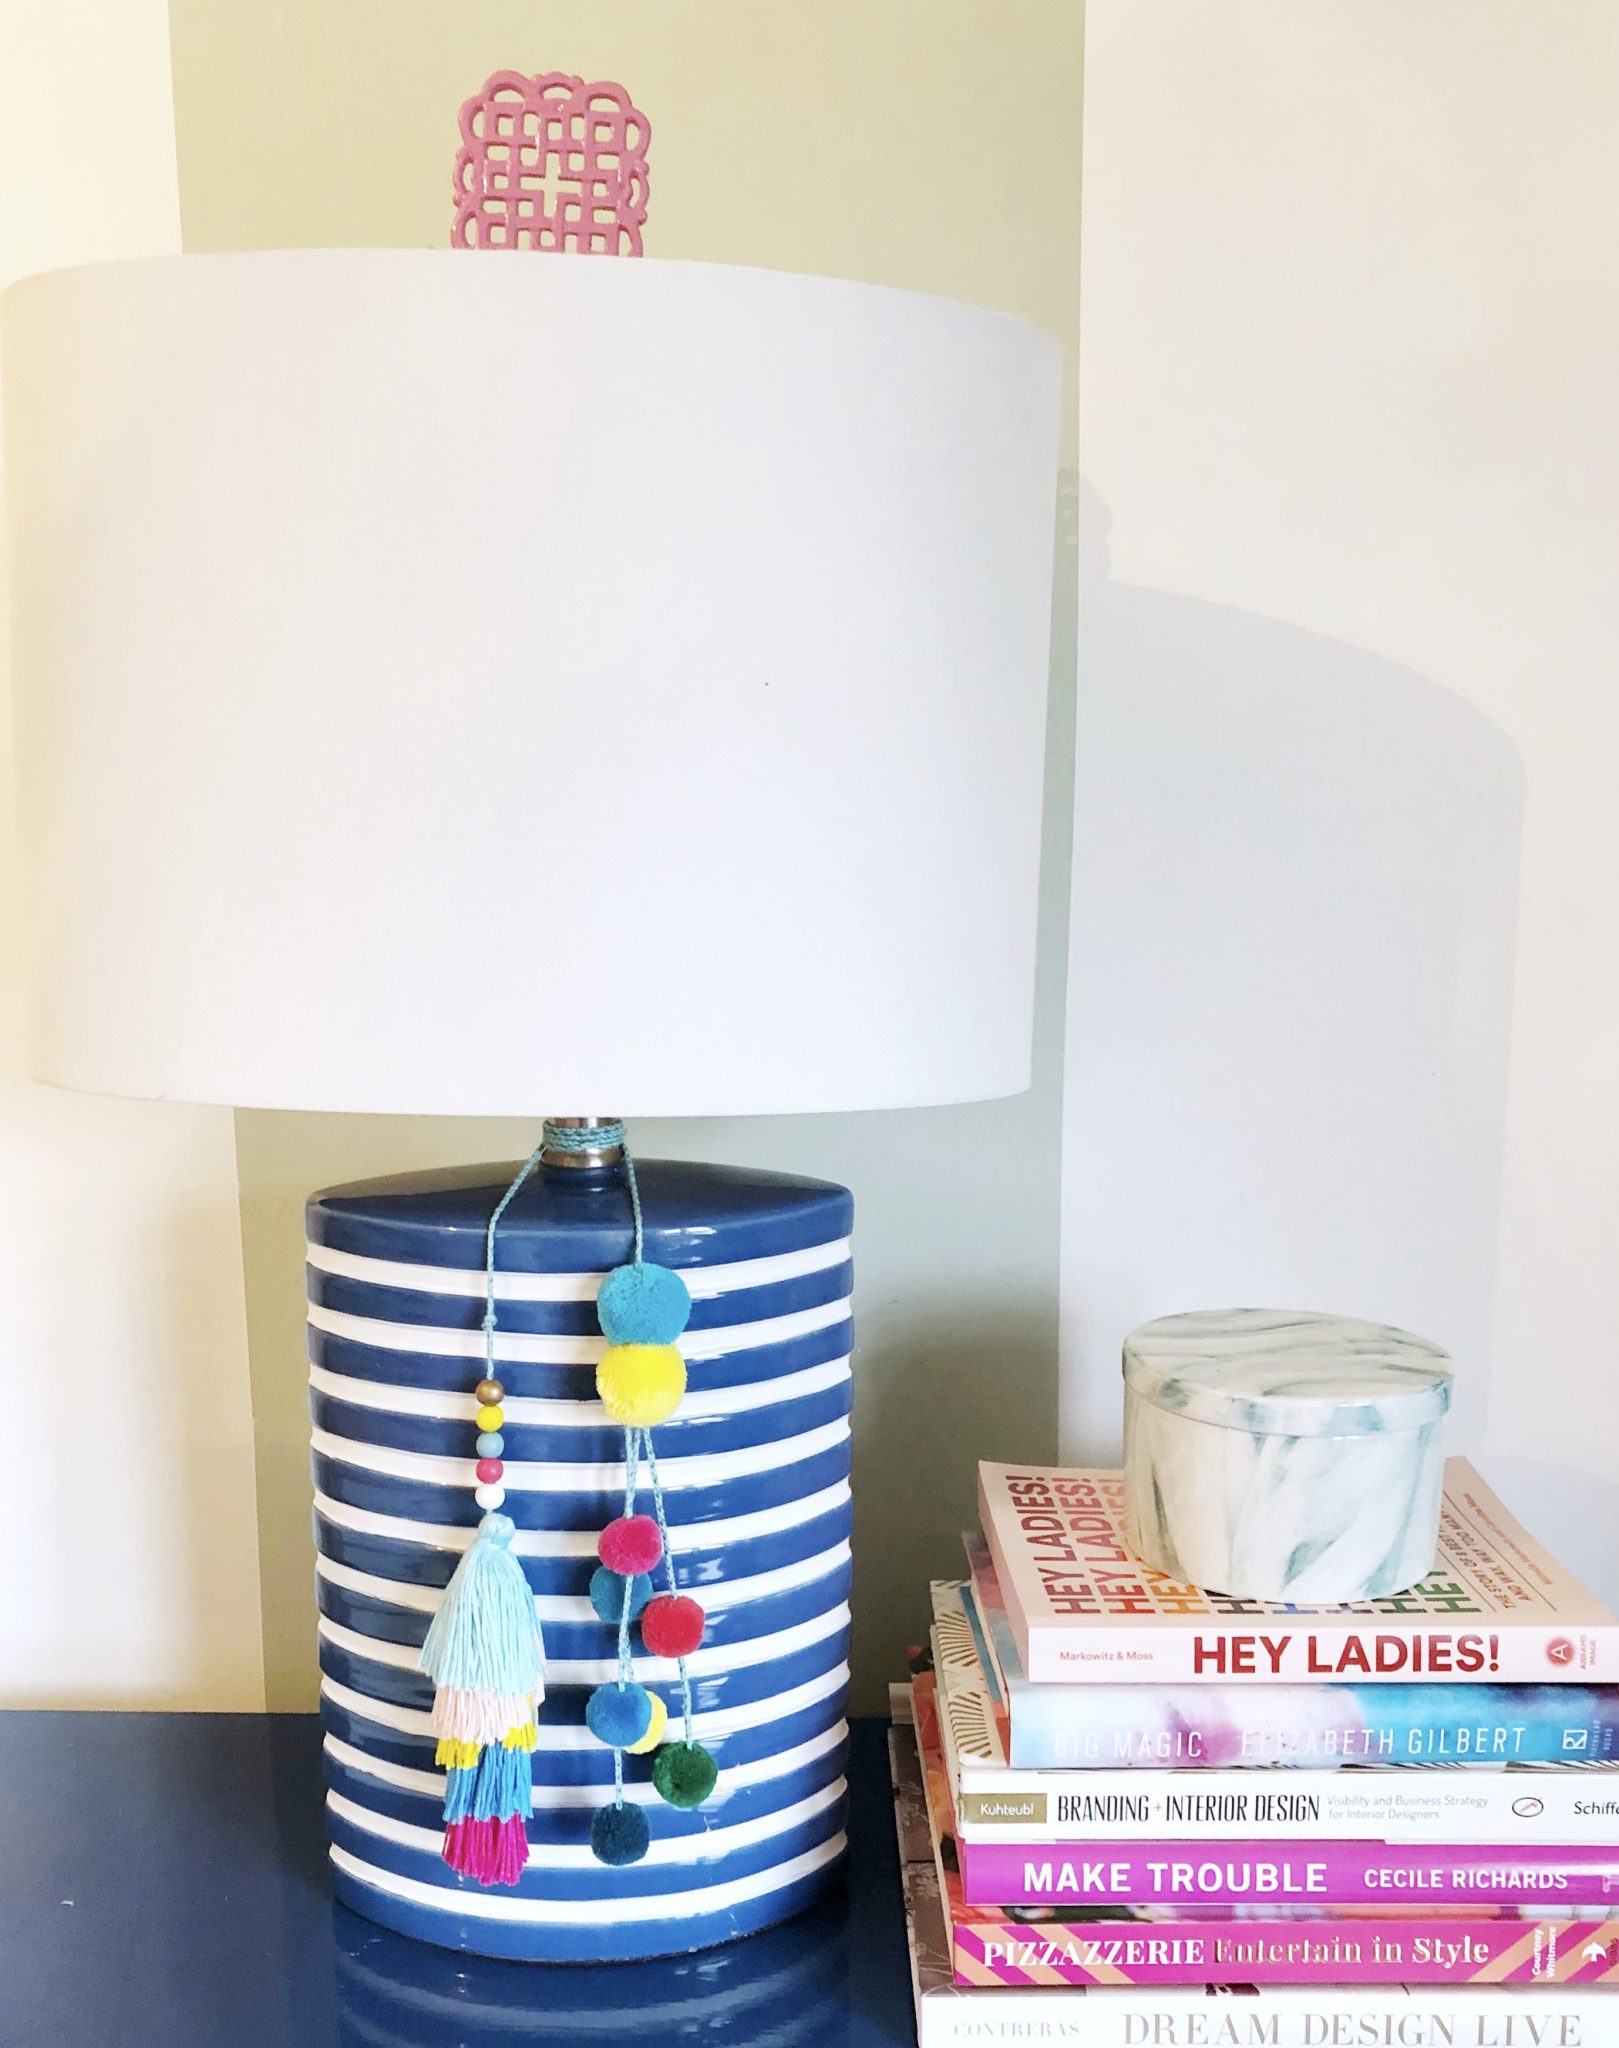 HOW-TO-DECORATE-A-LAMP-WITH-TASSELS